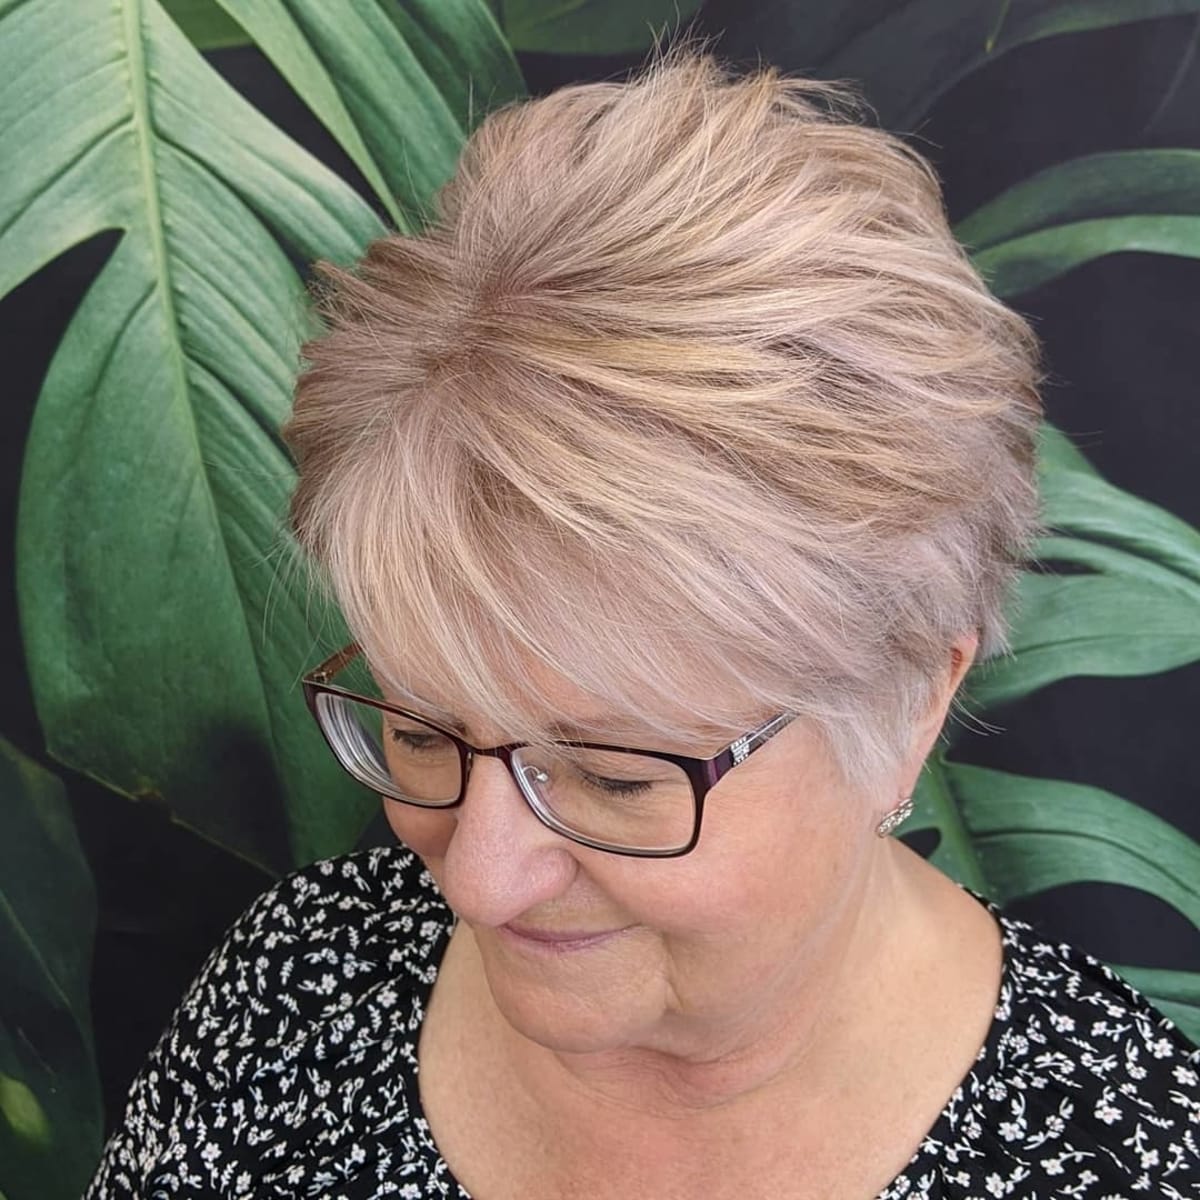 15 Best Pixie Haircuts for Women Over 60 (2021 Trends)